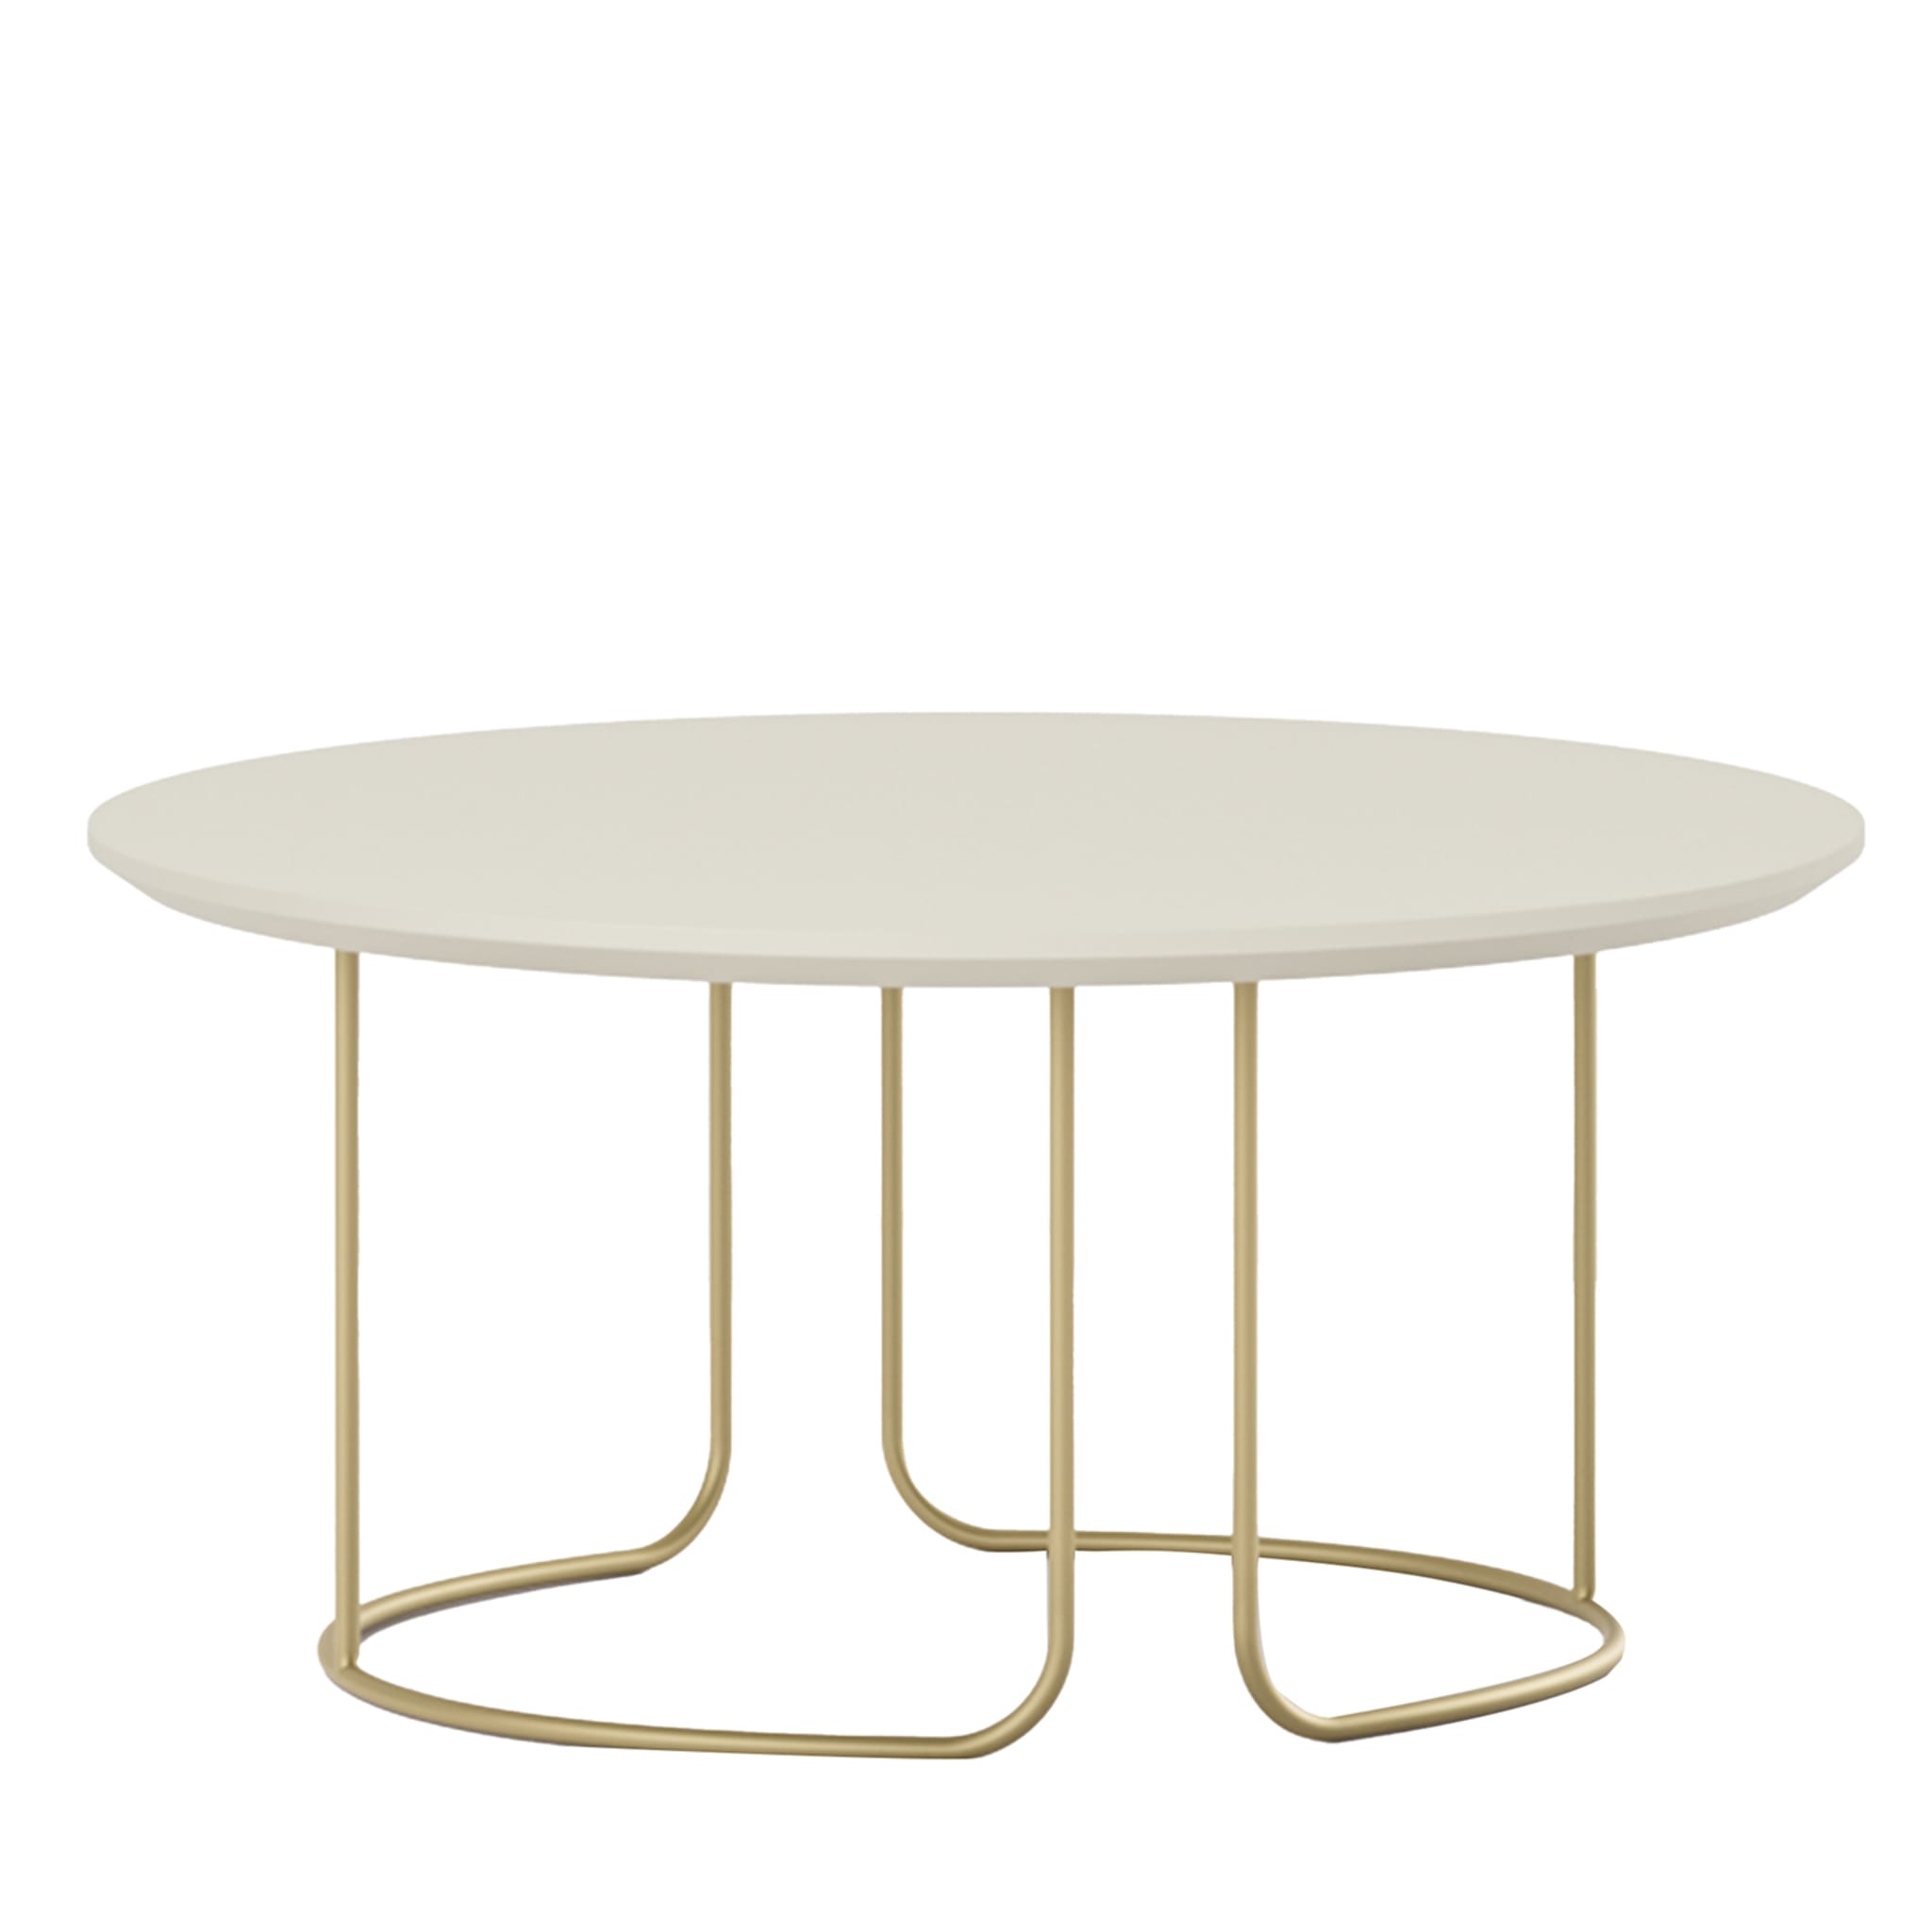 Scala Round White & Gold Coffee Table by Marco Piva - Main view